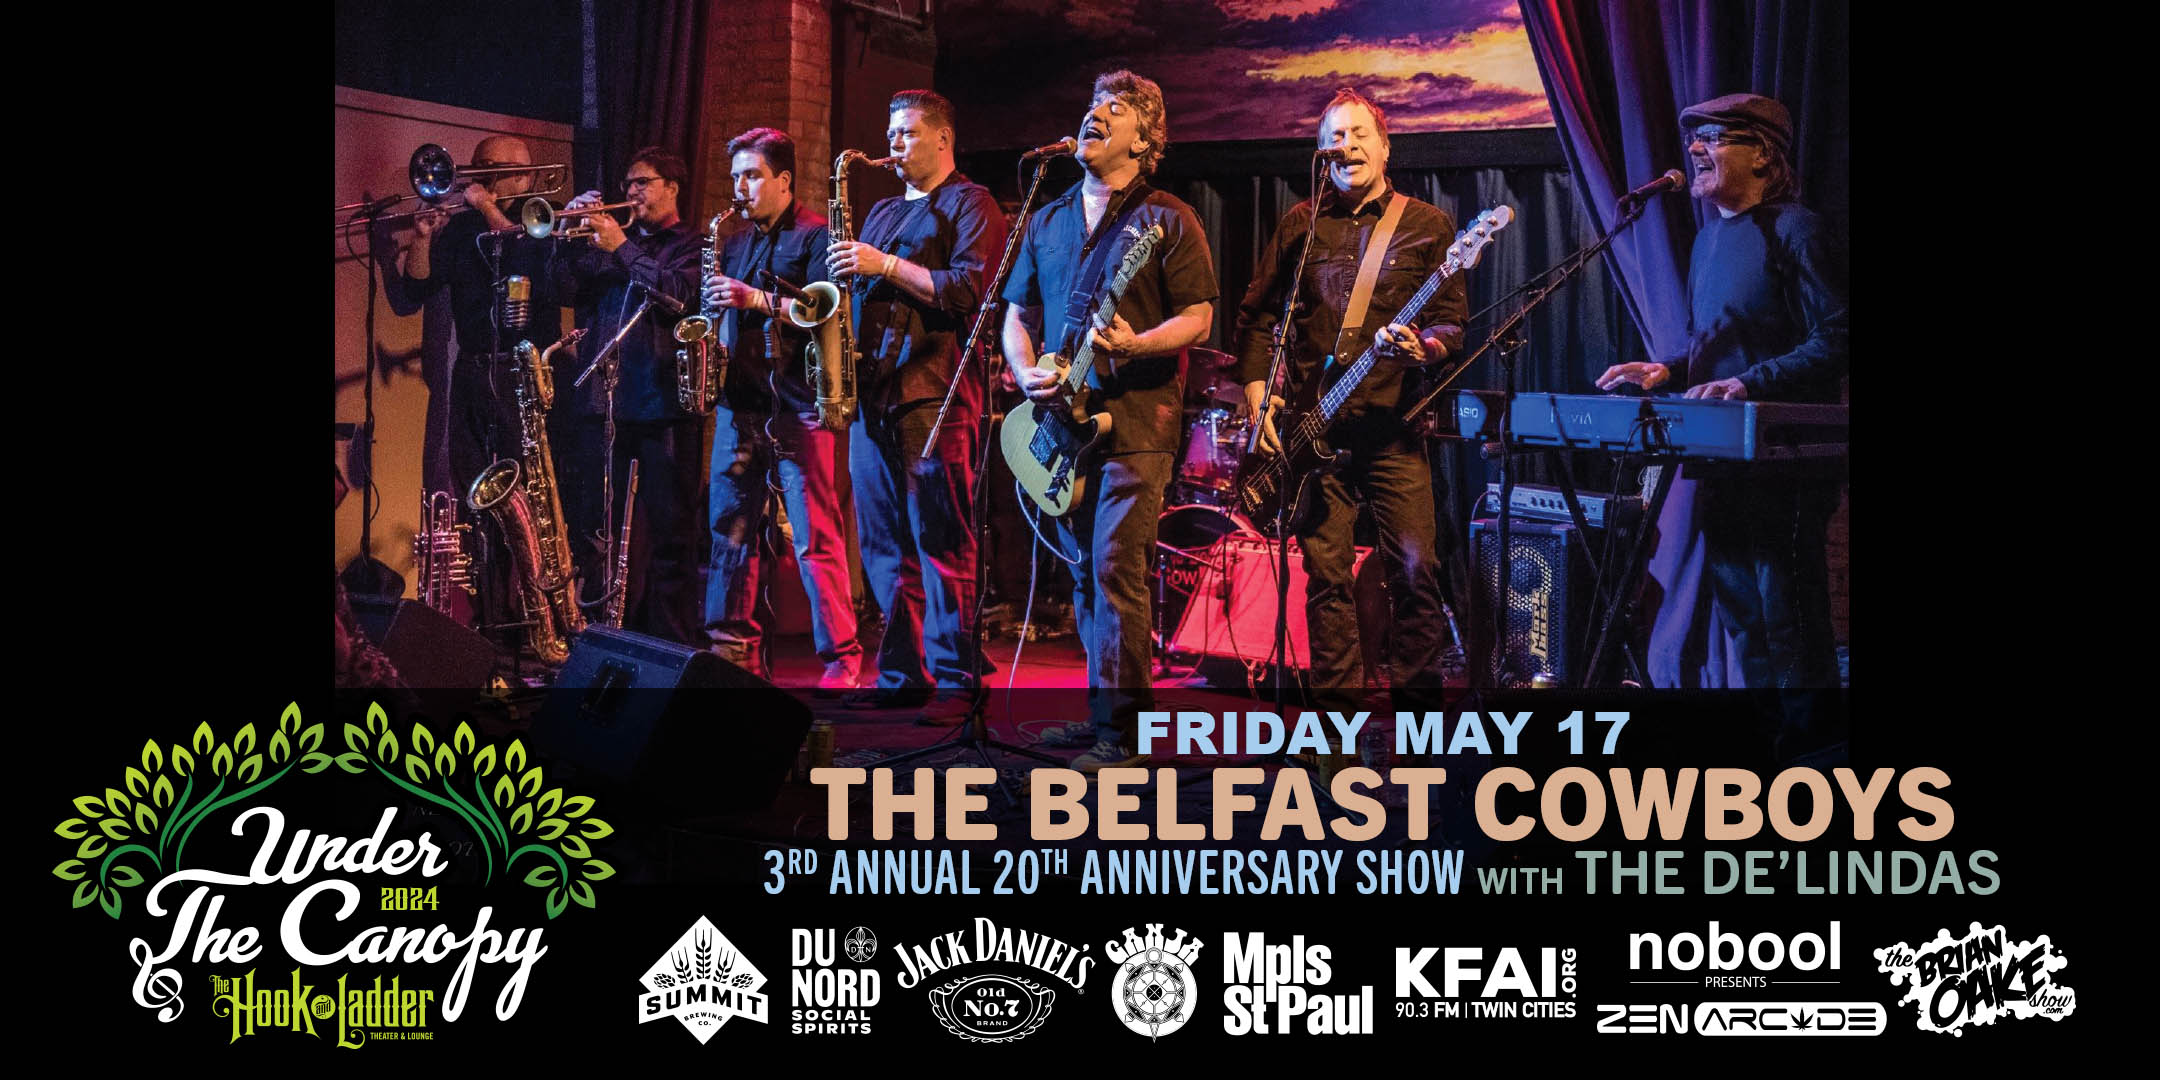 The Belfast Cowboys Anniversary Show with The de'Lindas The Belfast Cowboys 3rd Annual 20th Anniversary Show Friday, May 17, 2024 Under The Canopy at The Hook and Ladder Theater "An Urban Outdoor Summer Concert Series" Doors 6:00pm :: Music 7:00pm :: 21+ Reserved Seats: $35 GA: $20 ADV / $25 DOS